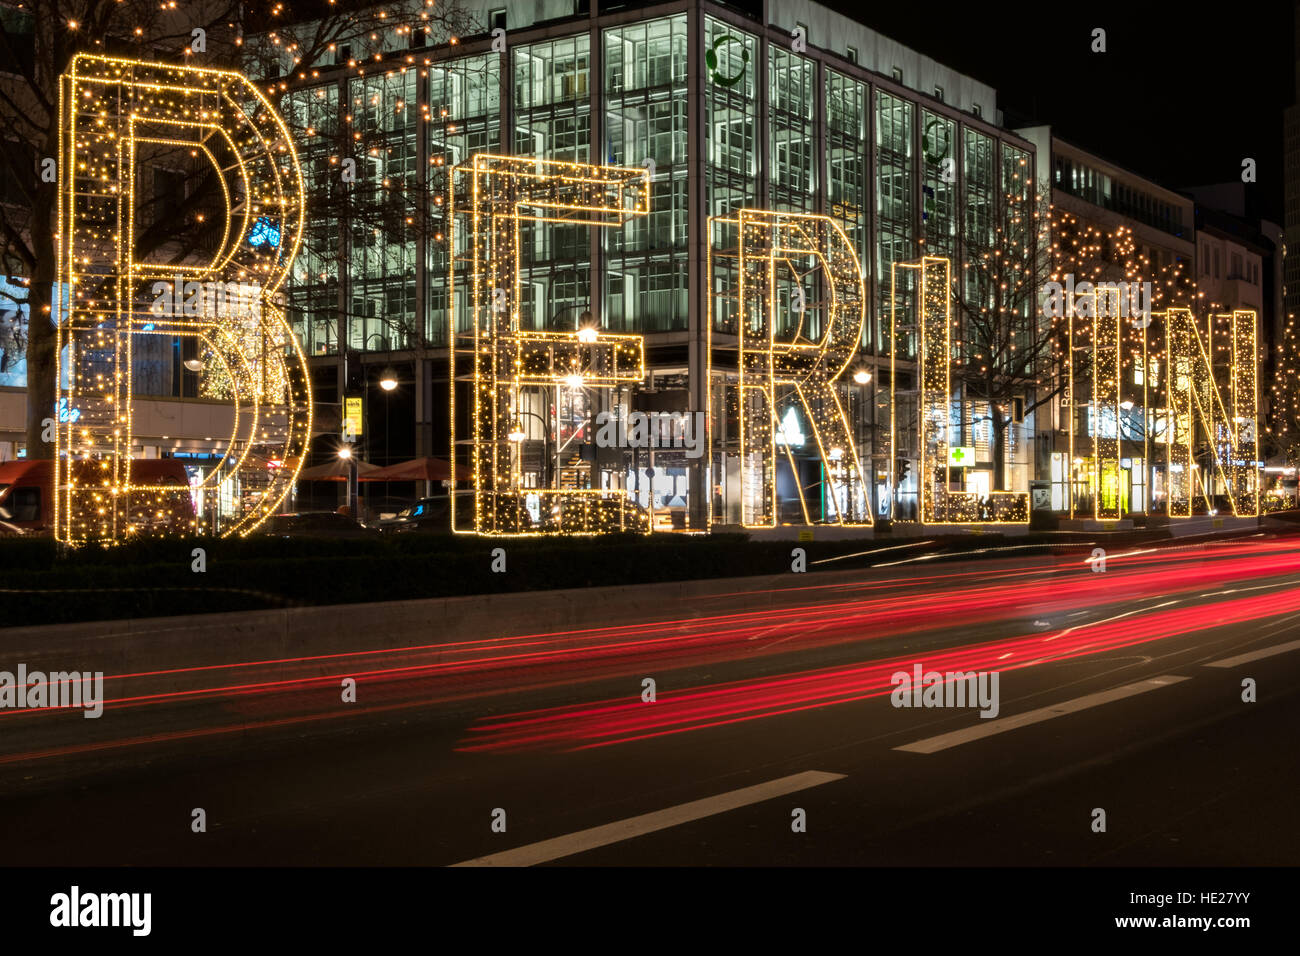 Berlin city at night - lettres lumineuses sur street Banque D'Images